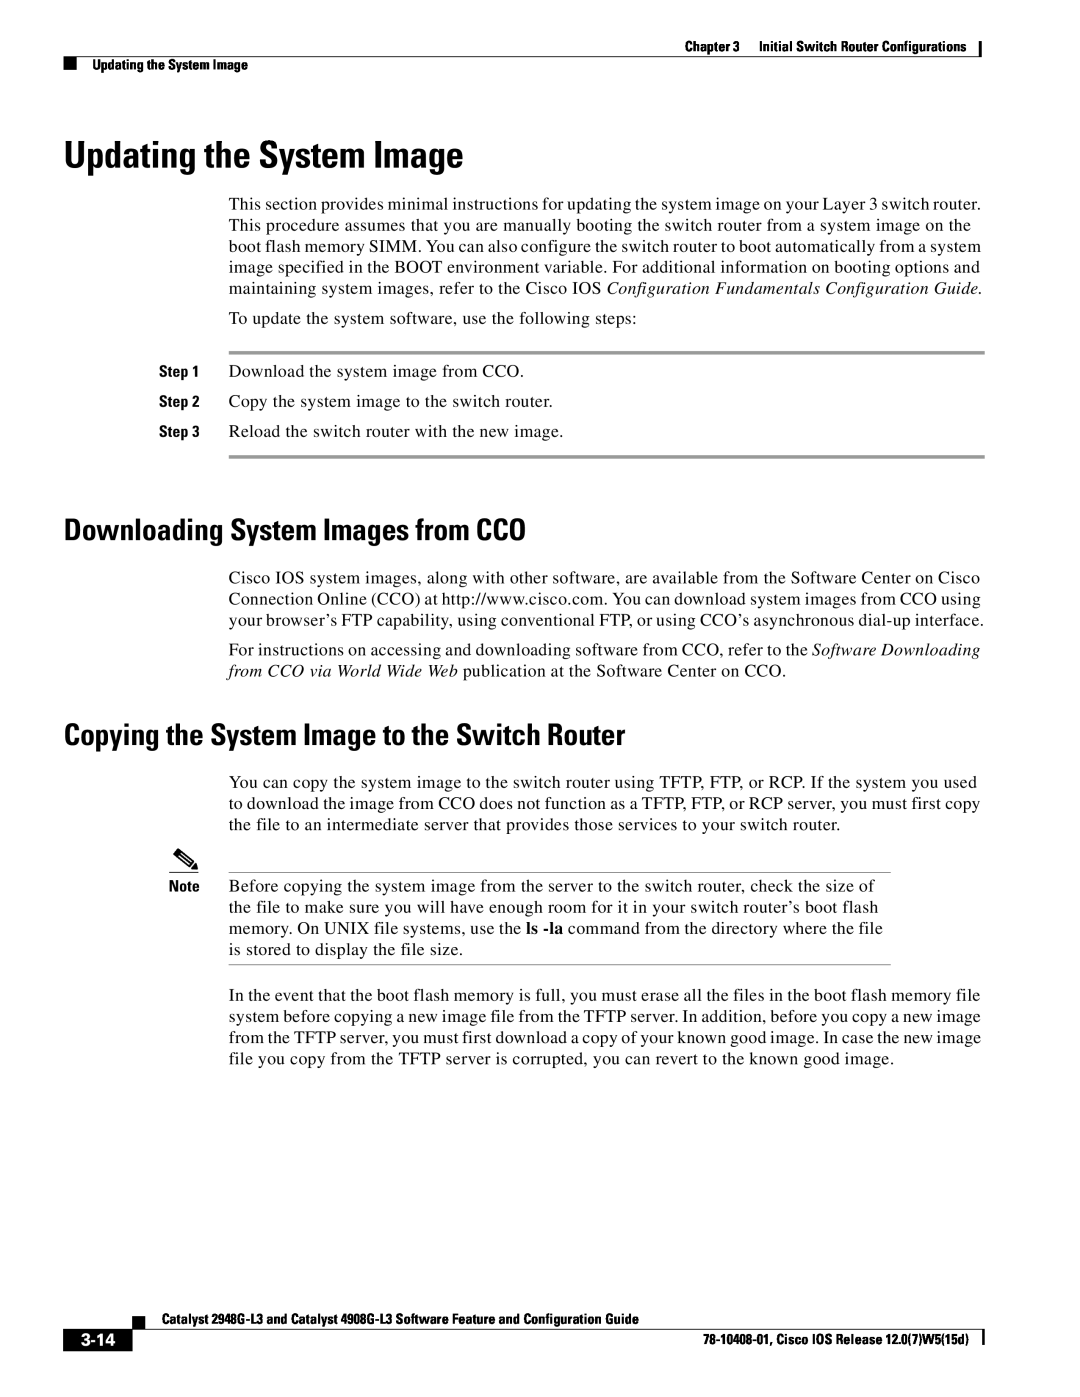 Cisco Systems manual Updating the System Image, Downloading System Images from CCO, 3-14 